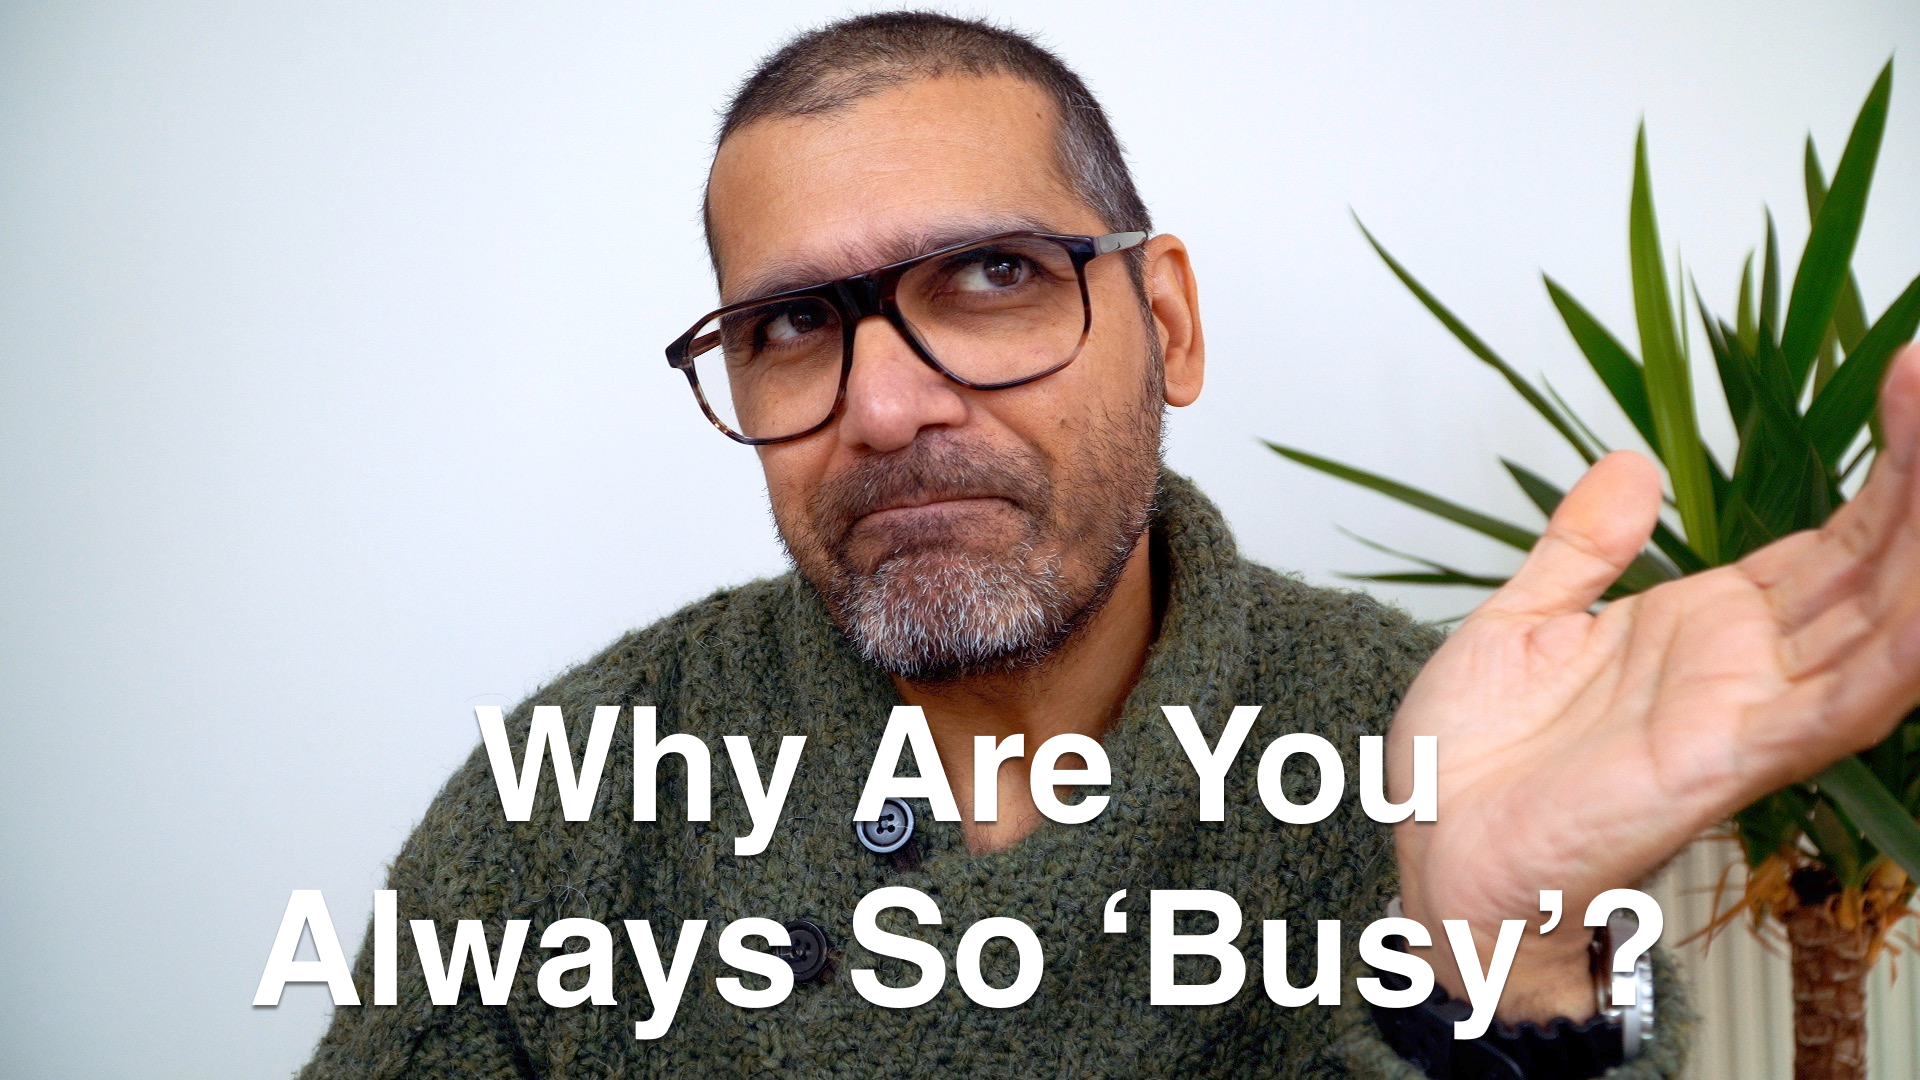 Why are you always so busy?